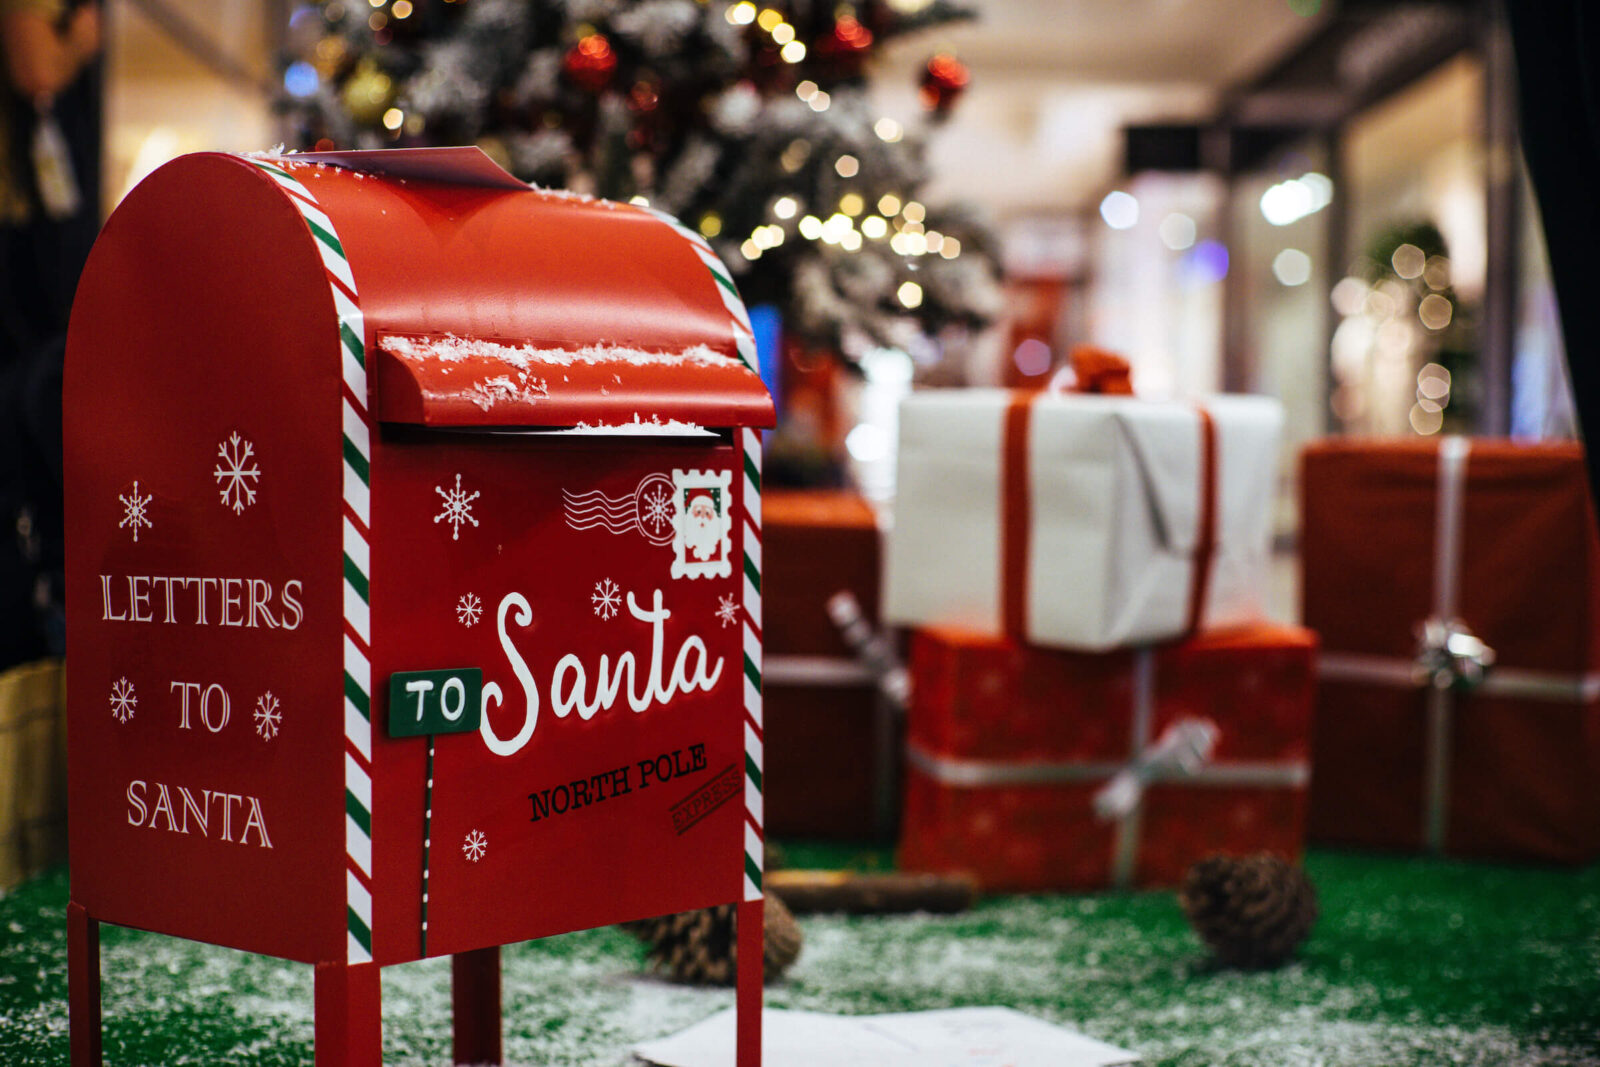 Letters to Santa at The Marketplace Mall